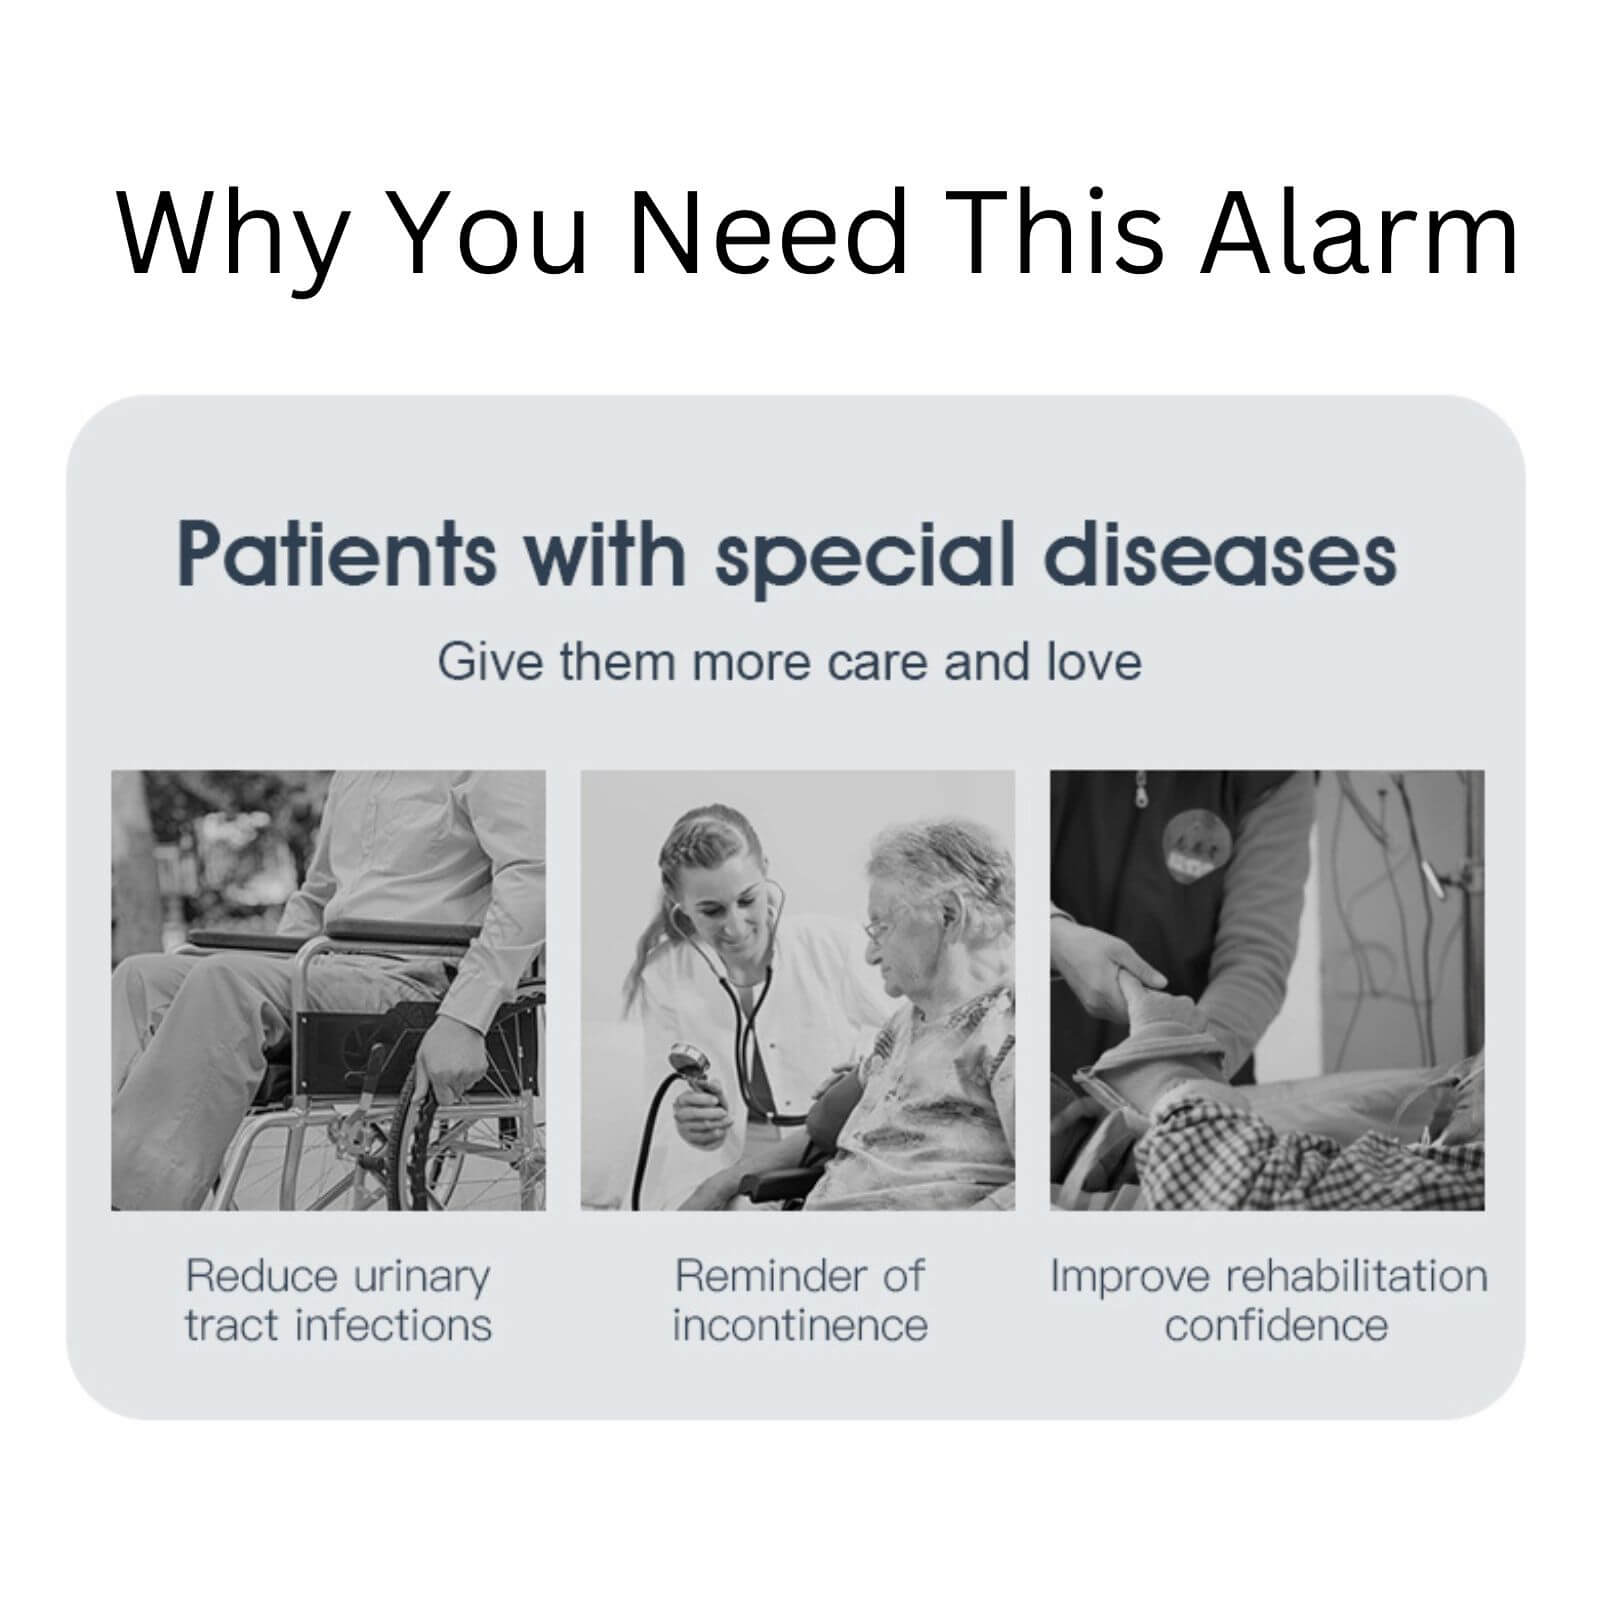 why you need a Bed wetting alarm for patients